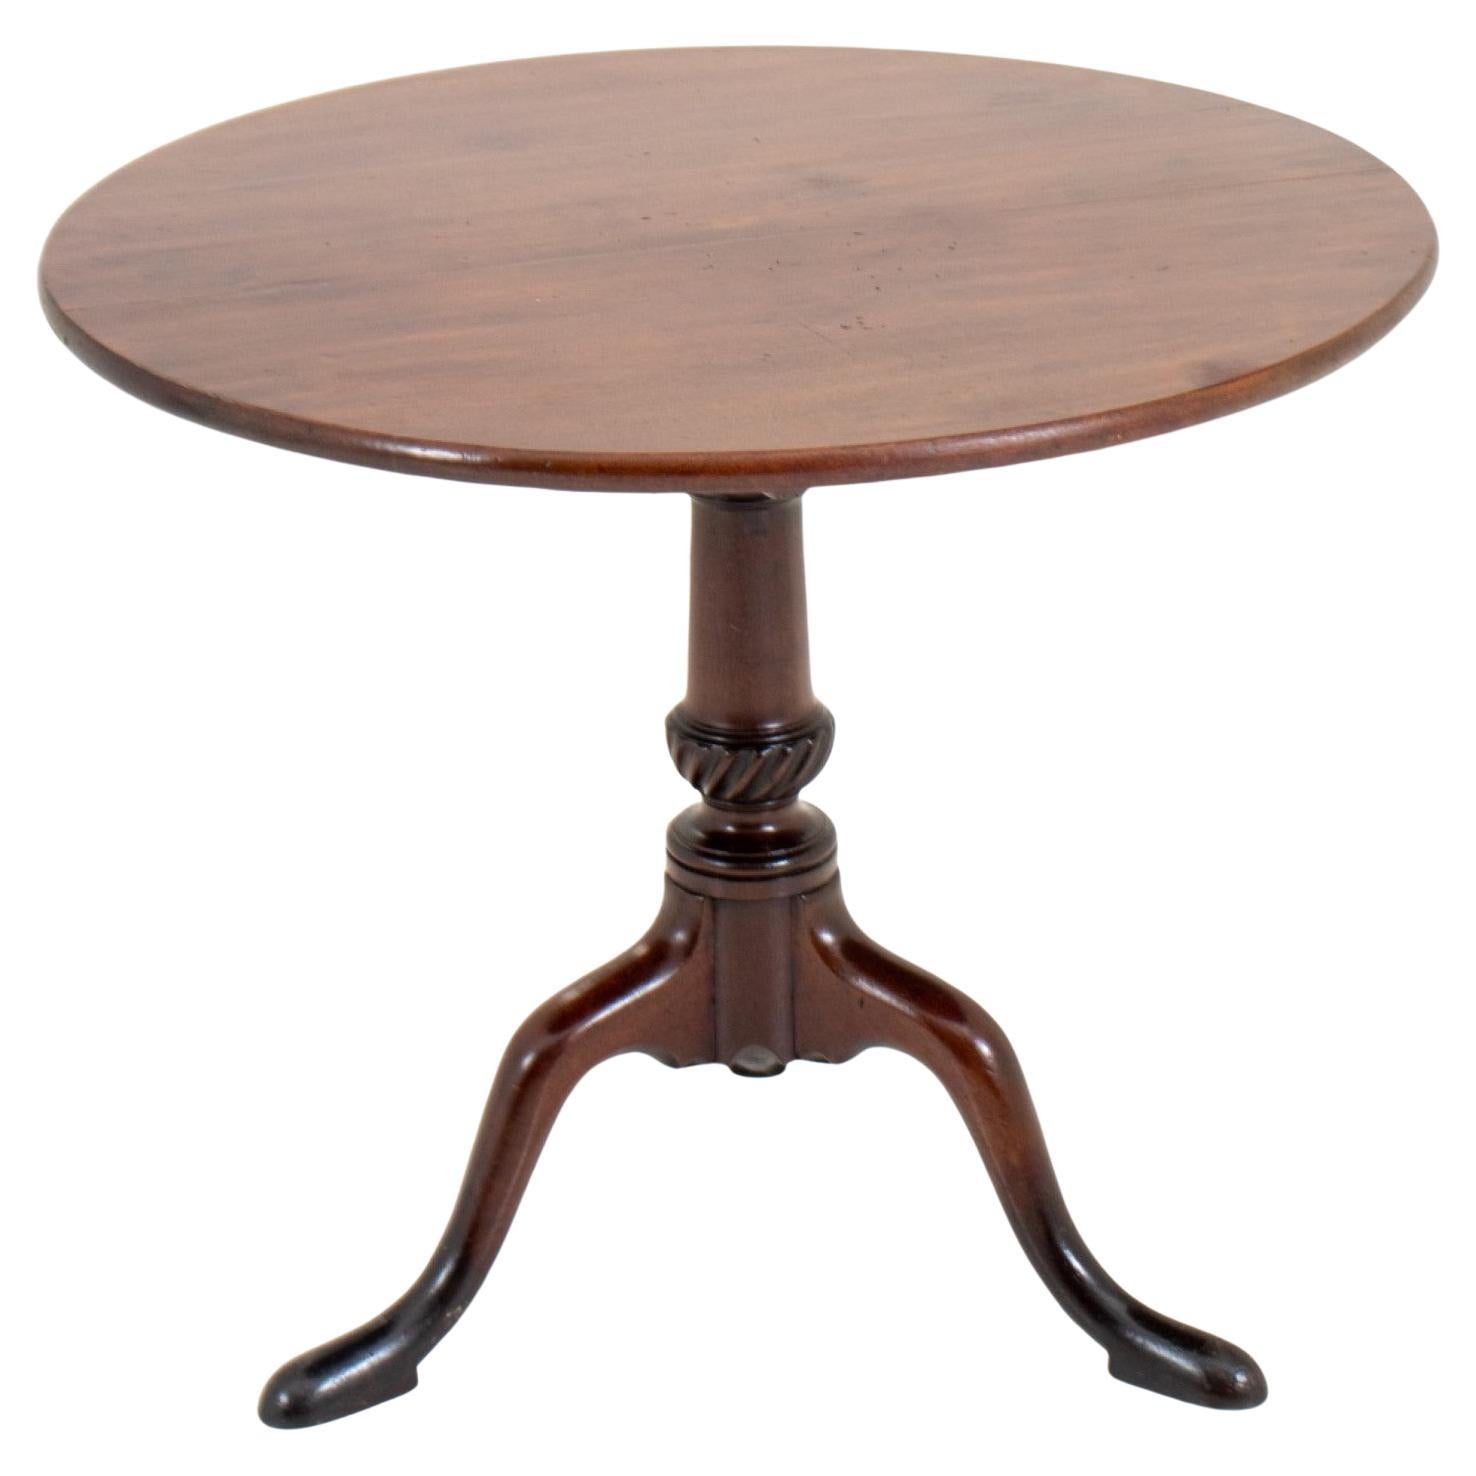 George III Style Tilt Top Tripod Table For Sale